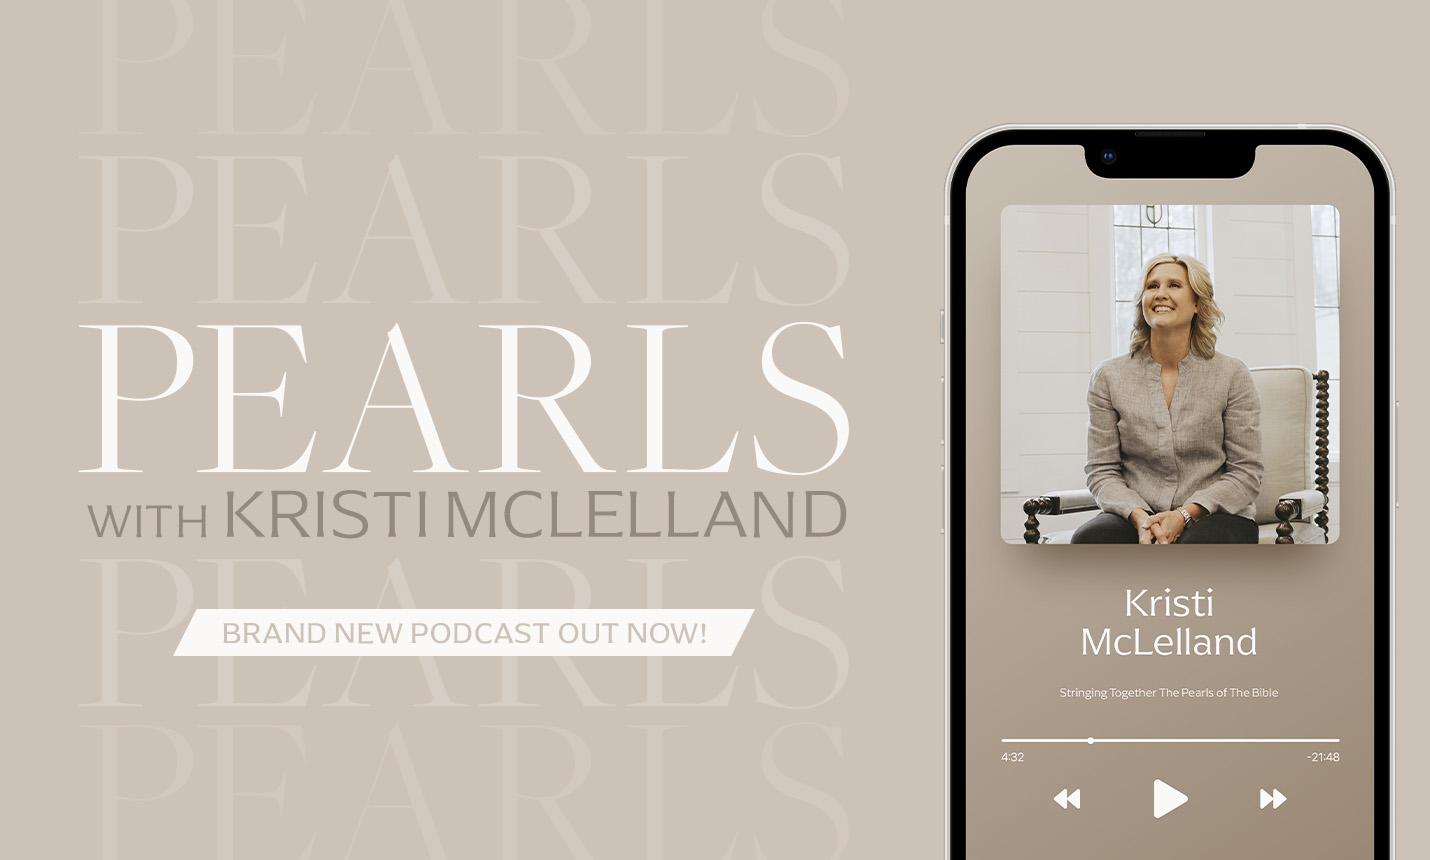 Pearls with Kristi McLelland - Brand New Out Now